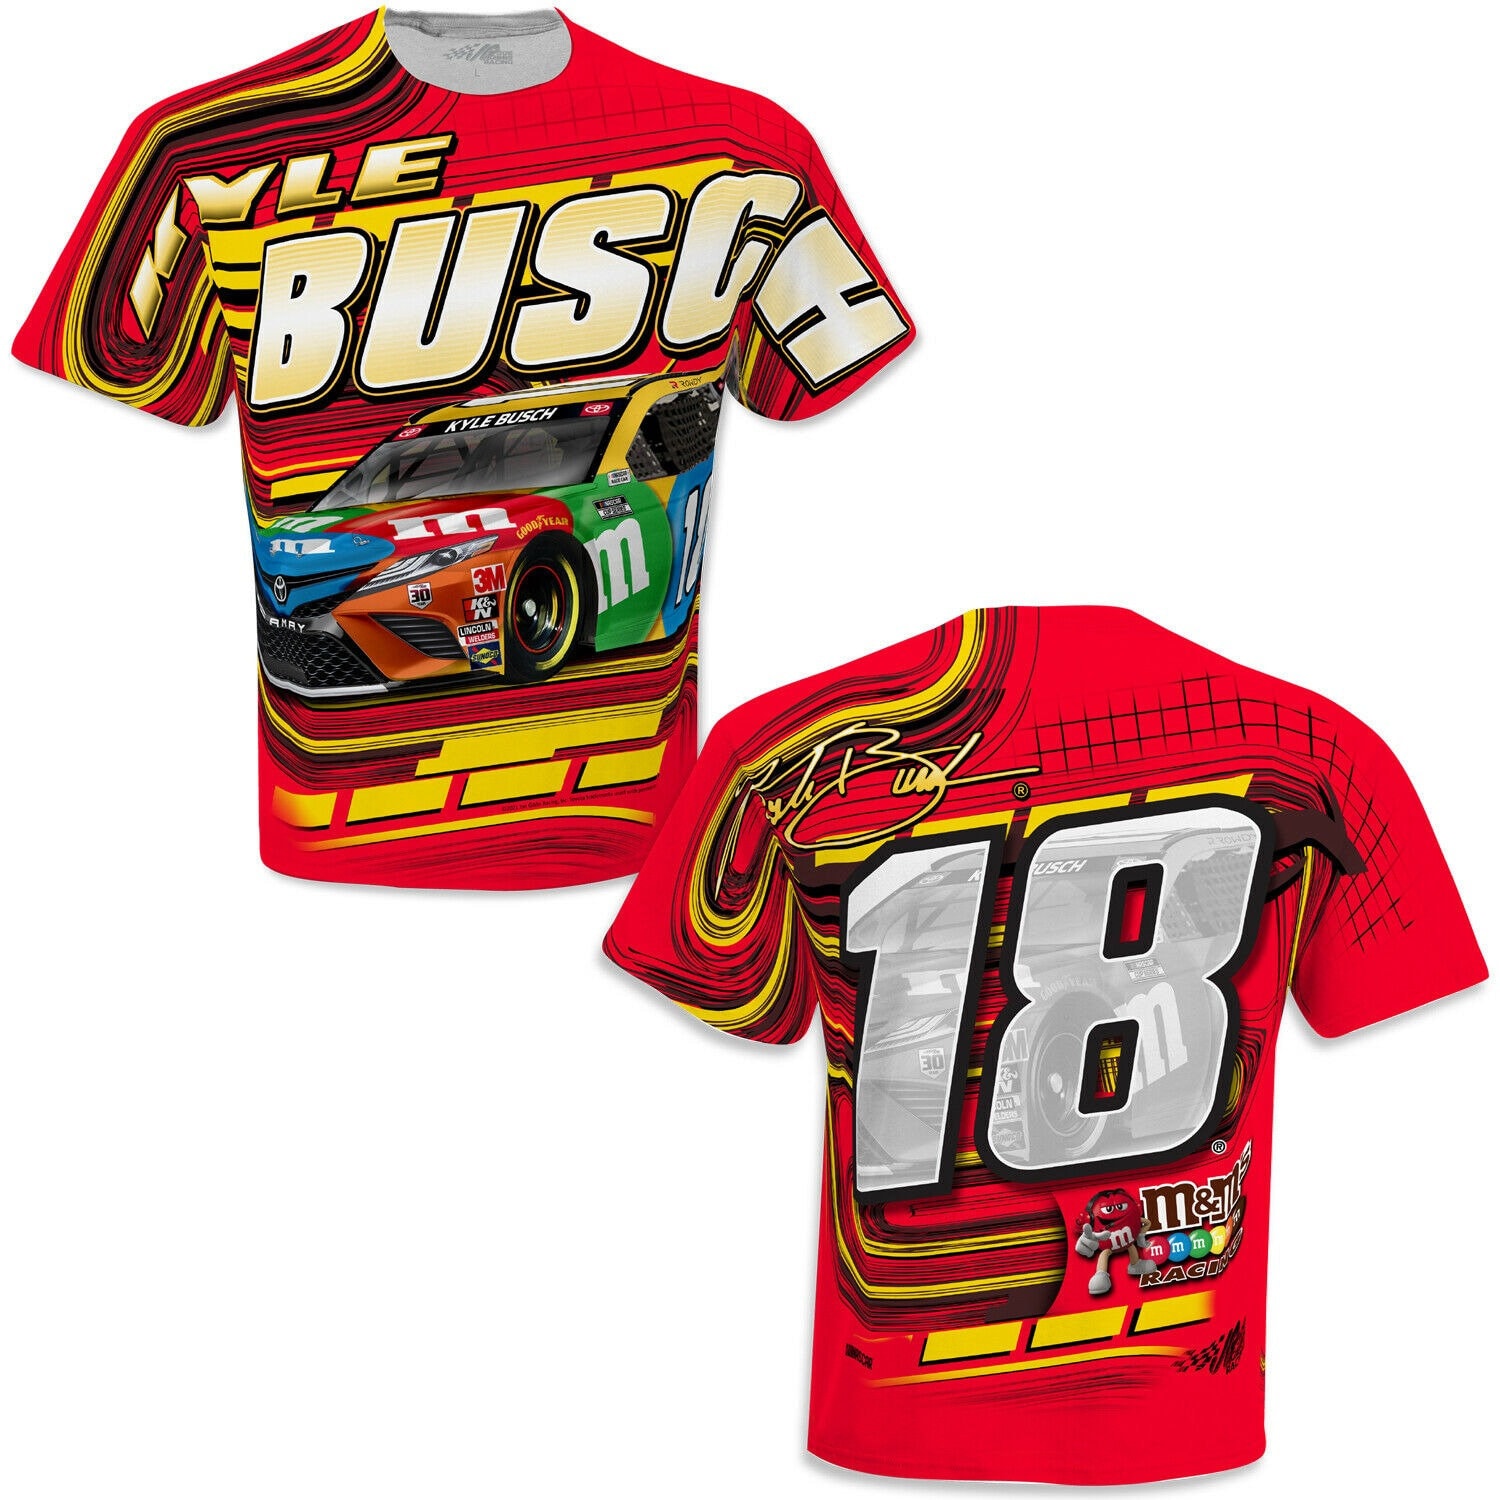 Kyle Busch #18 M&Ms Racing Red Yellow Sublimated Shirt